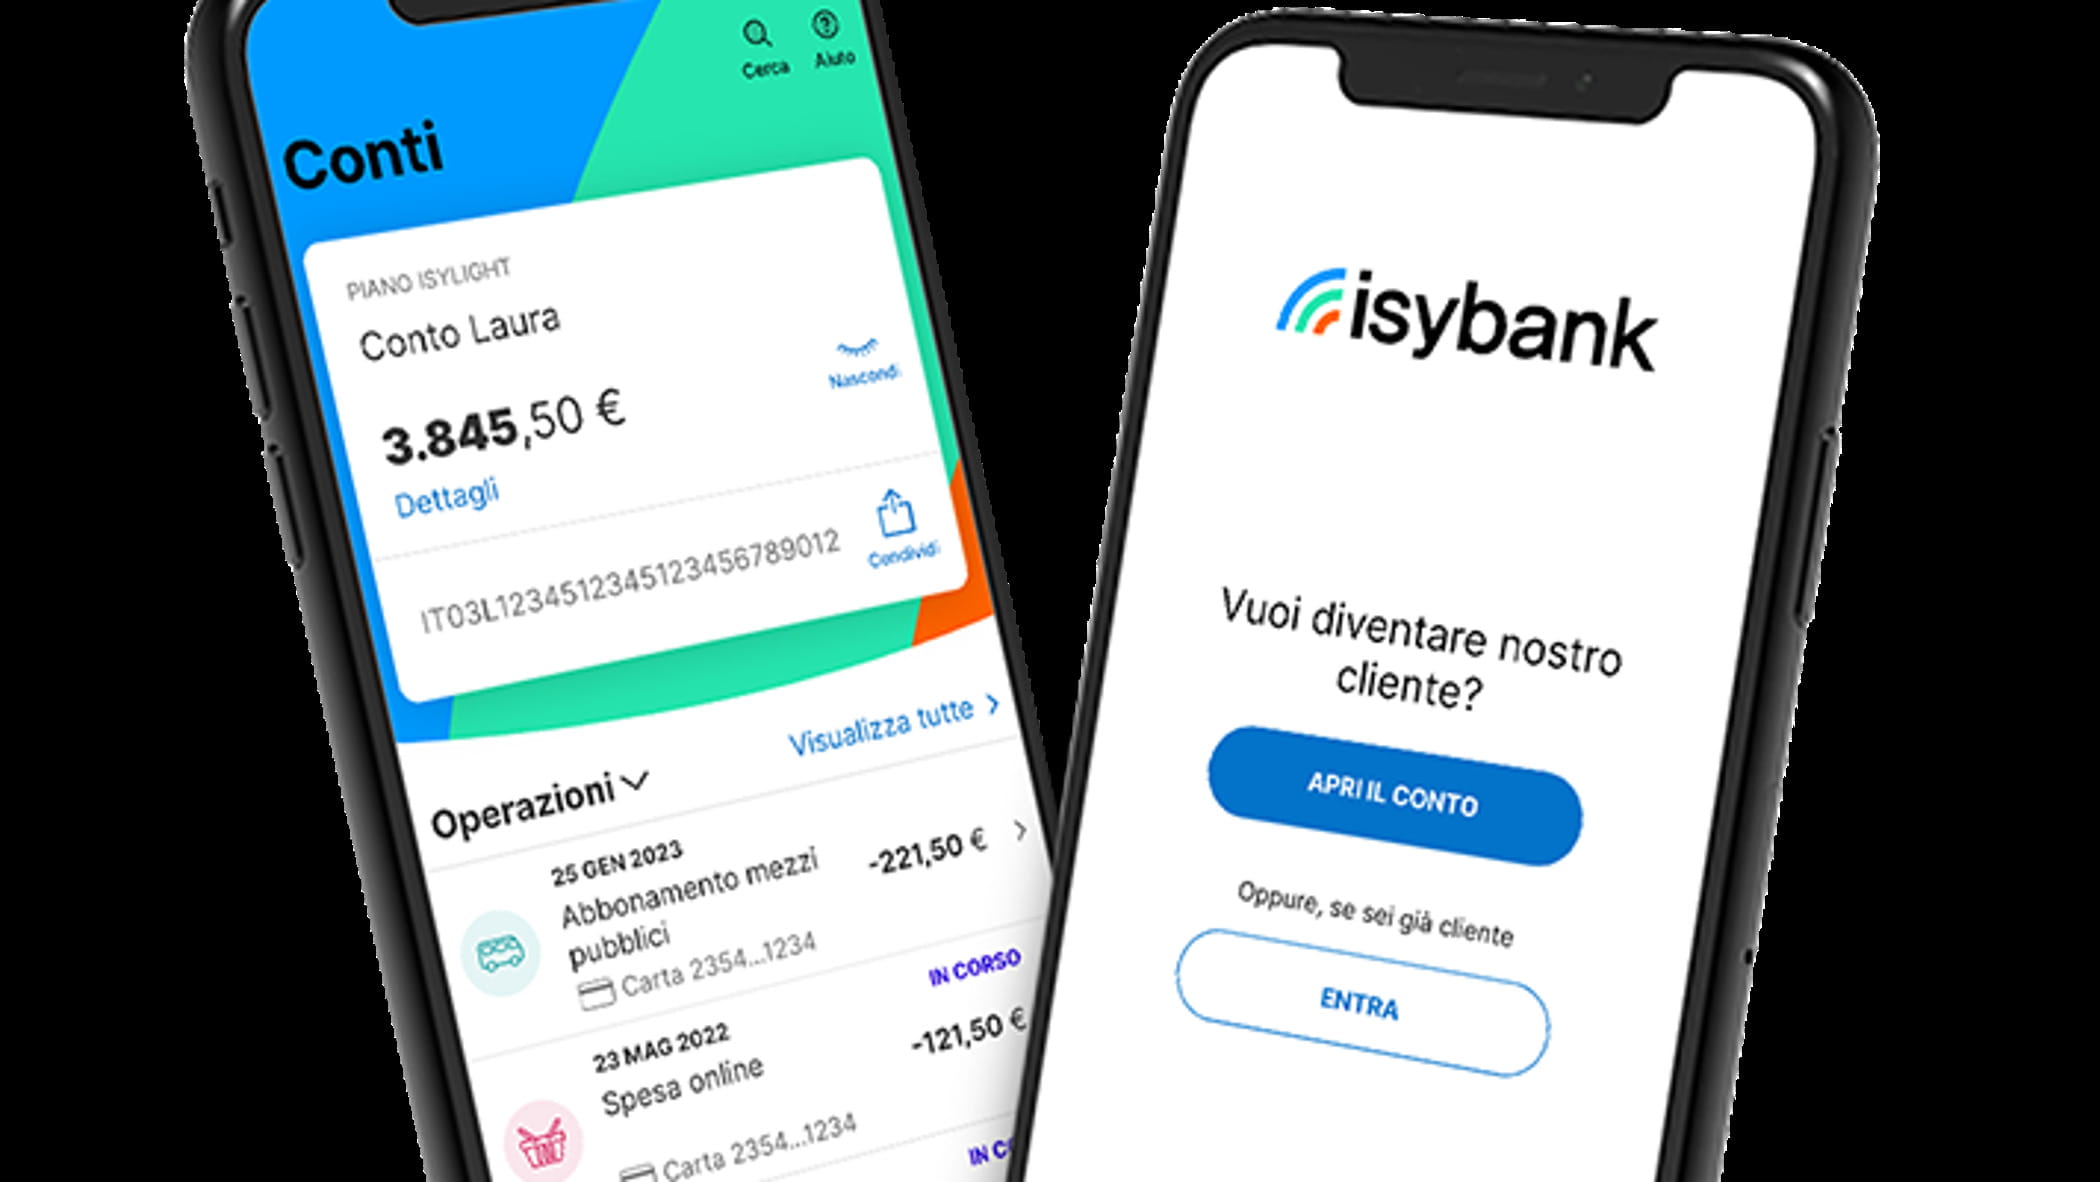 Isybank, the second migration since March: information and "express consent"